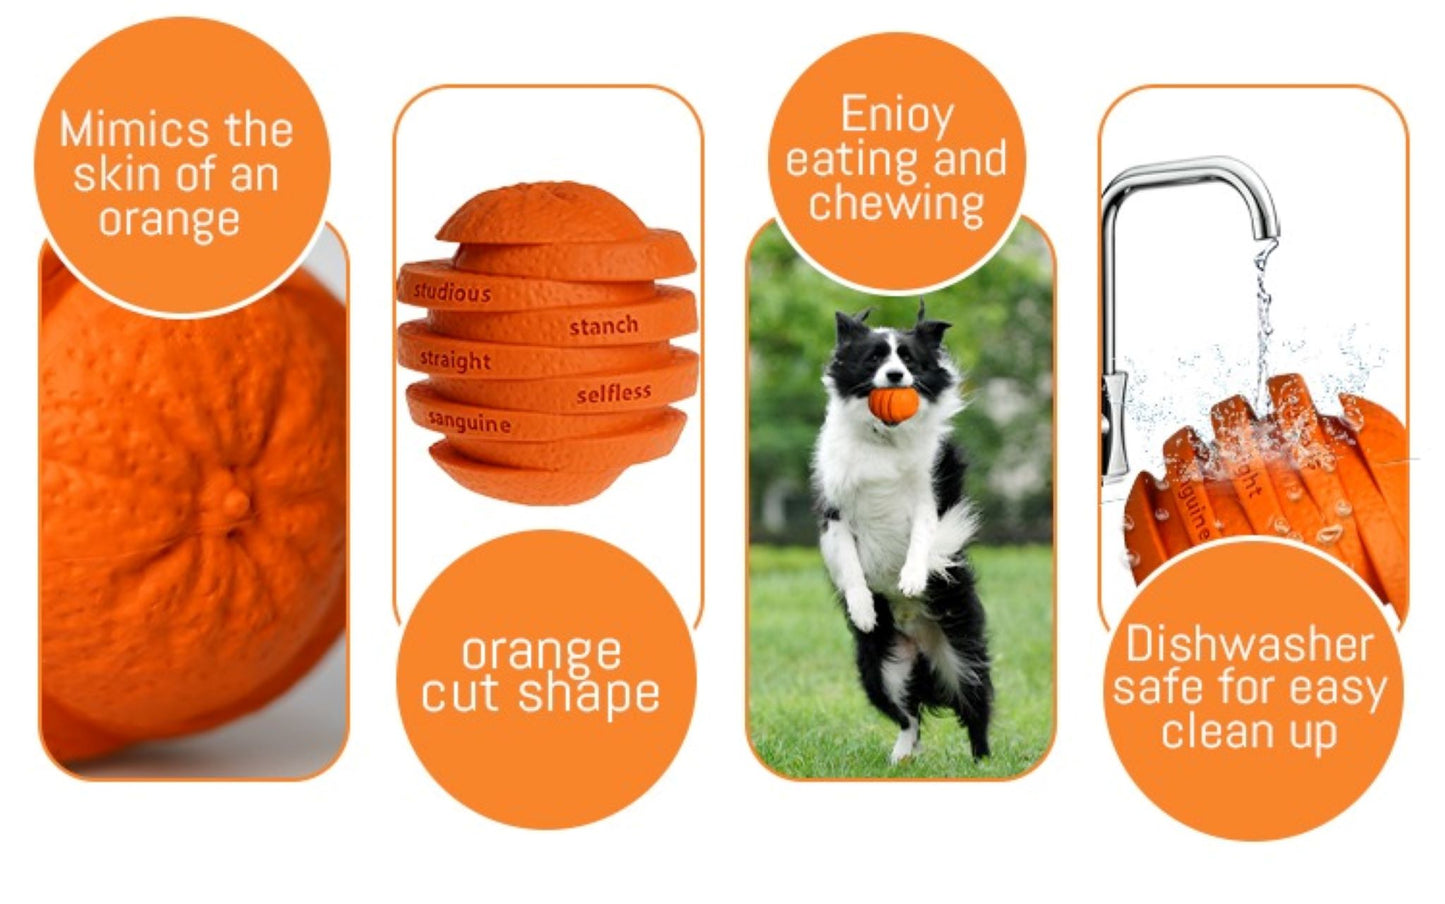 ROYAL PETS USA Indestructible, Durable & Tough Orange Dog Chew Toy for Aggressive Chewers. Slow Treat Dispensing Interactive Toys for S, M & L Breed -100% NATURAL RUBBER -10000 BITES TESTED - UNIQUE DESIGN FOR ORAL CARE